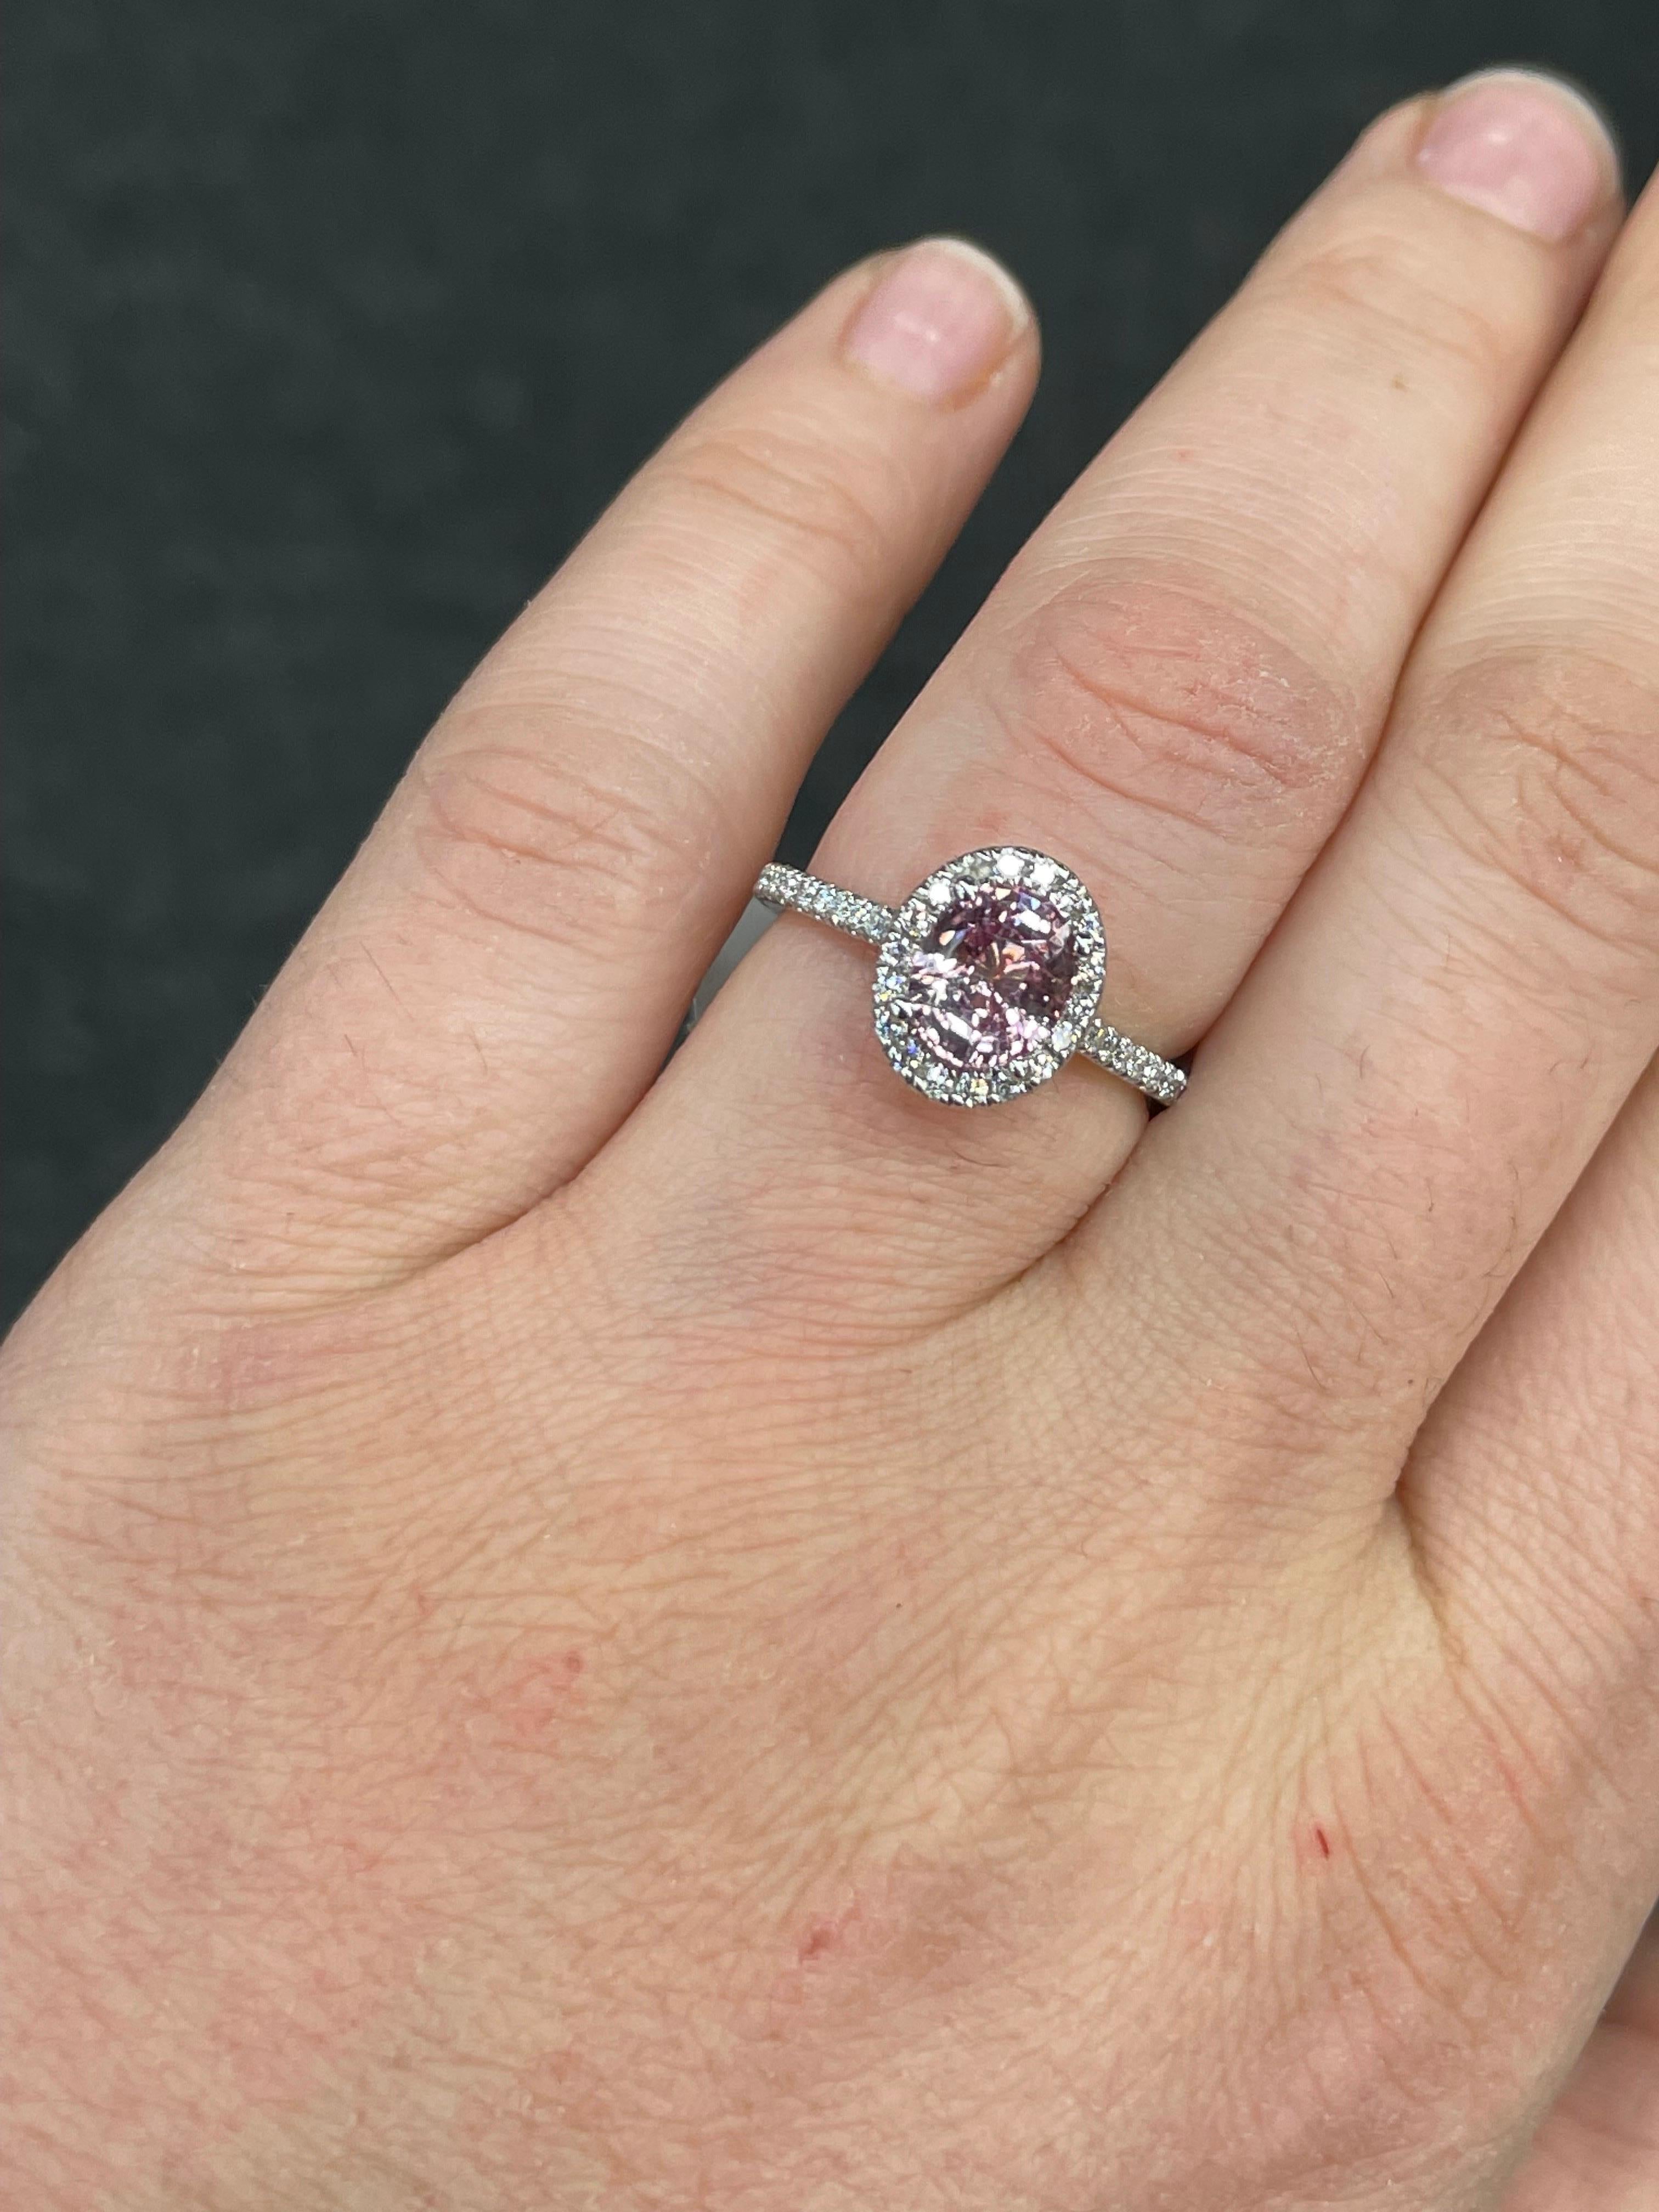 Certified Pink Sapphire No Heat Diamond Halo Ring 2.34 Carats 18k White Gold In New Condition For Sale In New York, NY